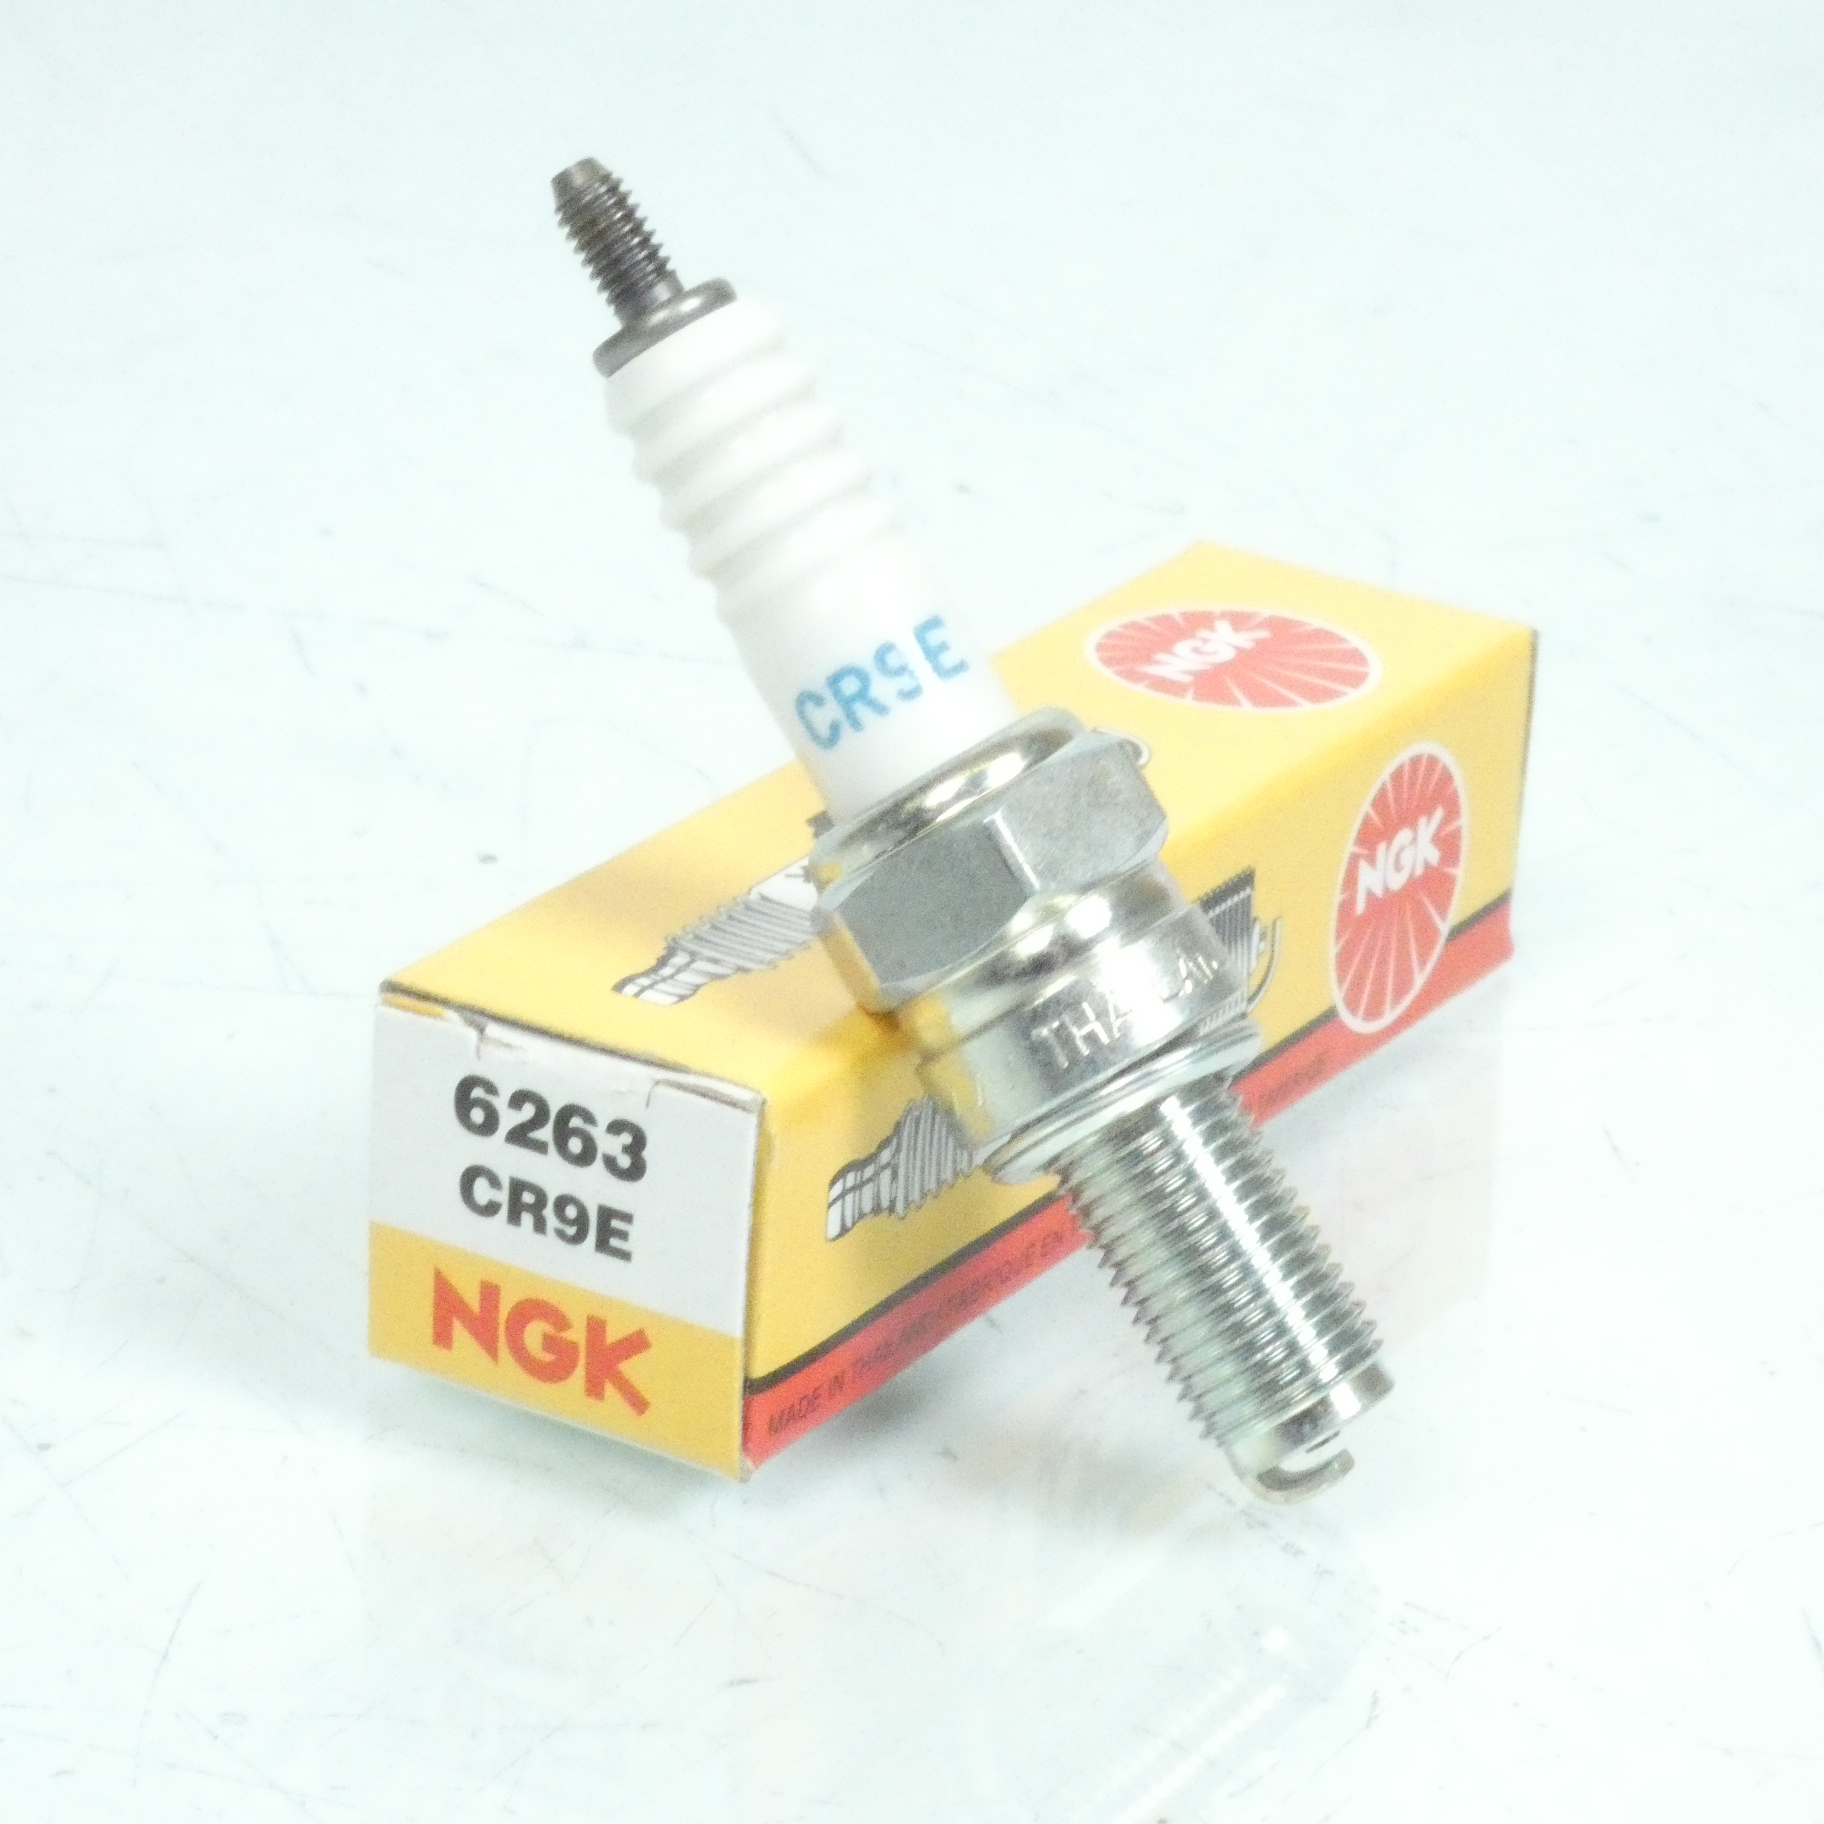 Bougie d'allumage NGK pour Scooter Derbi 250 GP1 2006 CR9E Neuf